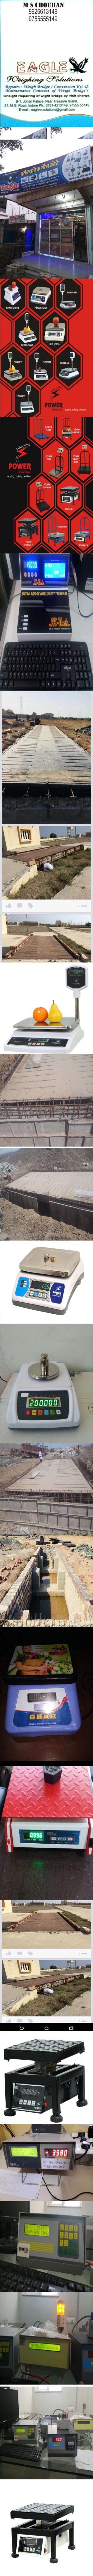 EAGLE WEIGHING SOLUTIONS 